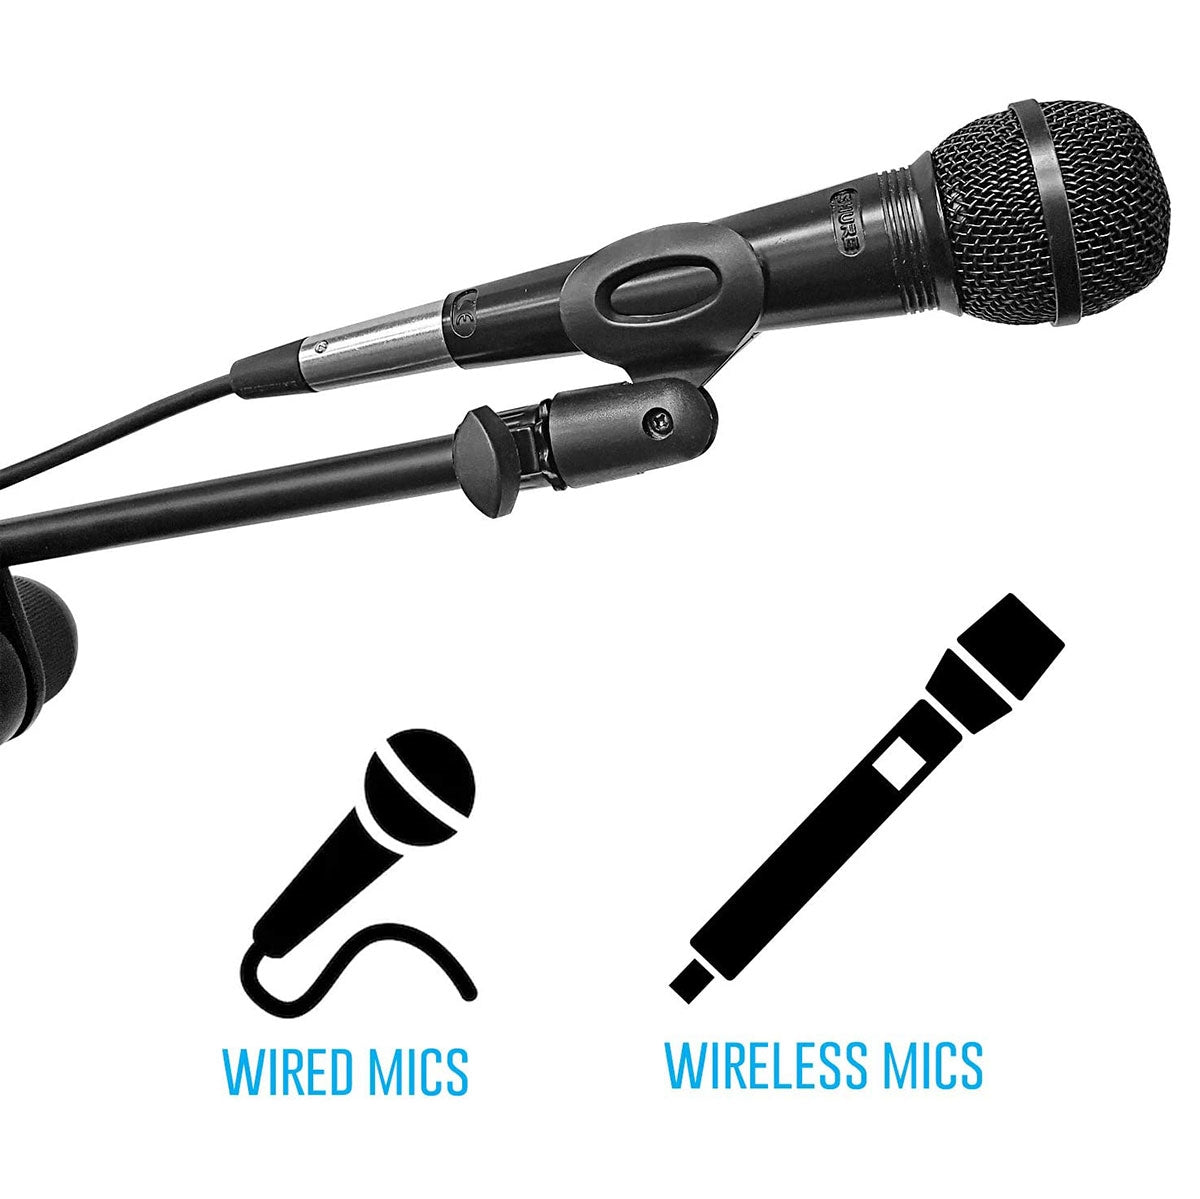 AxcessAbles One Hand Microphone Stand with Weighted Heavy Round Base and Quick Grip Height Adjustment - Telescoping Mic Boom Arm Included. Tall Microphone Stand for Singing (MS-201RB) (2-Pack) - Open Box